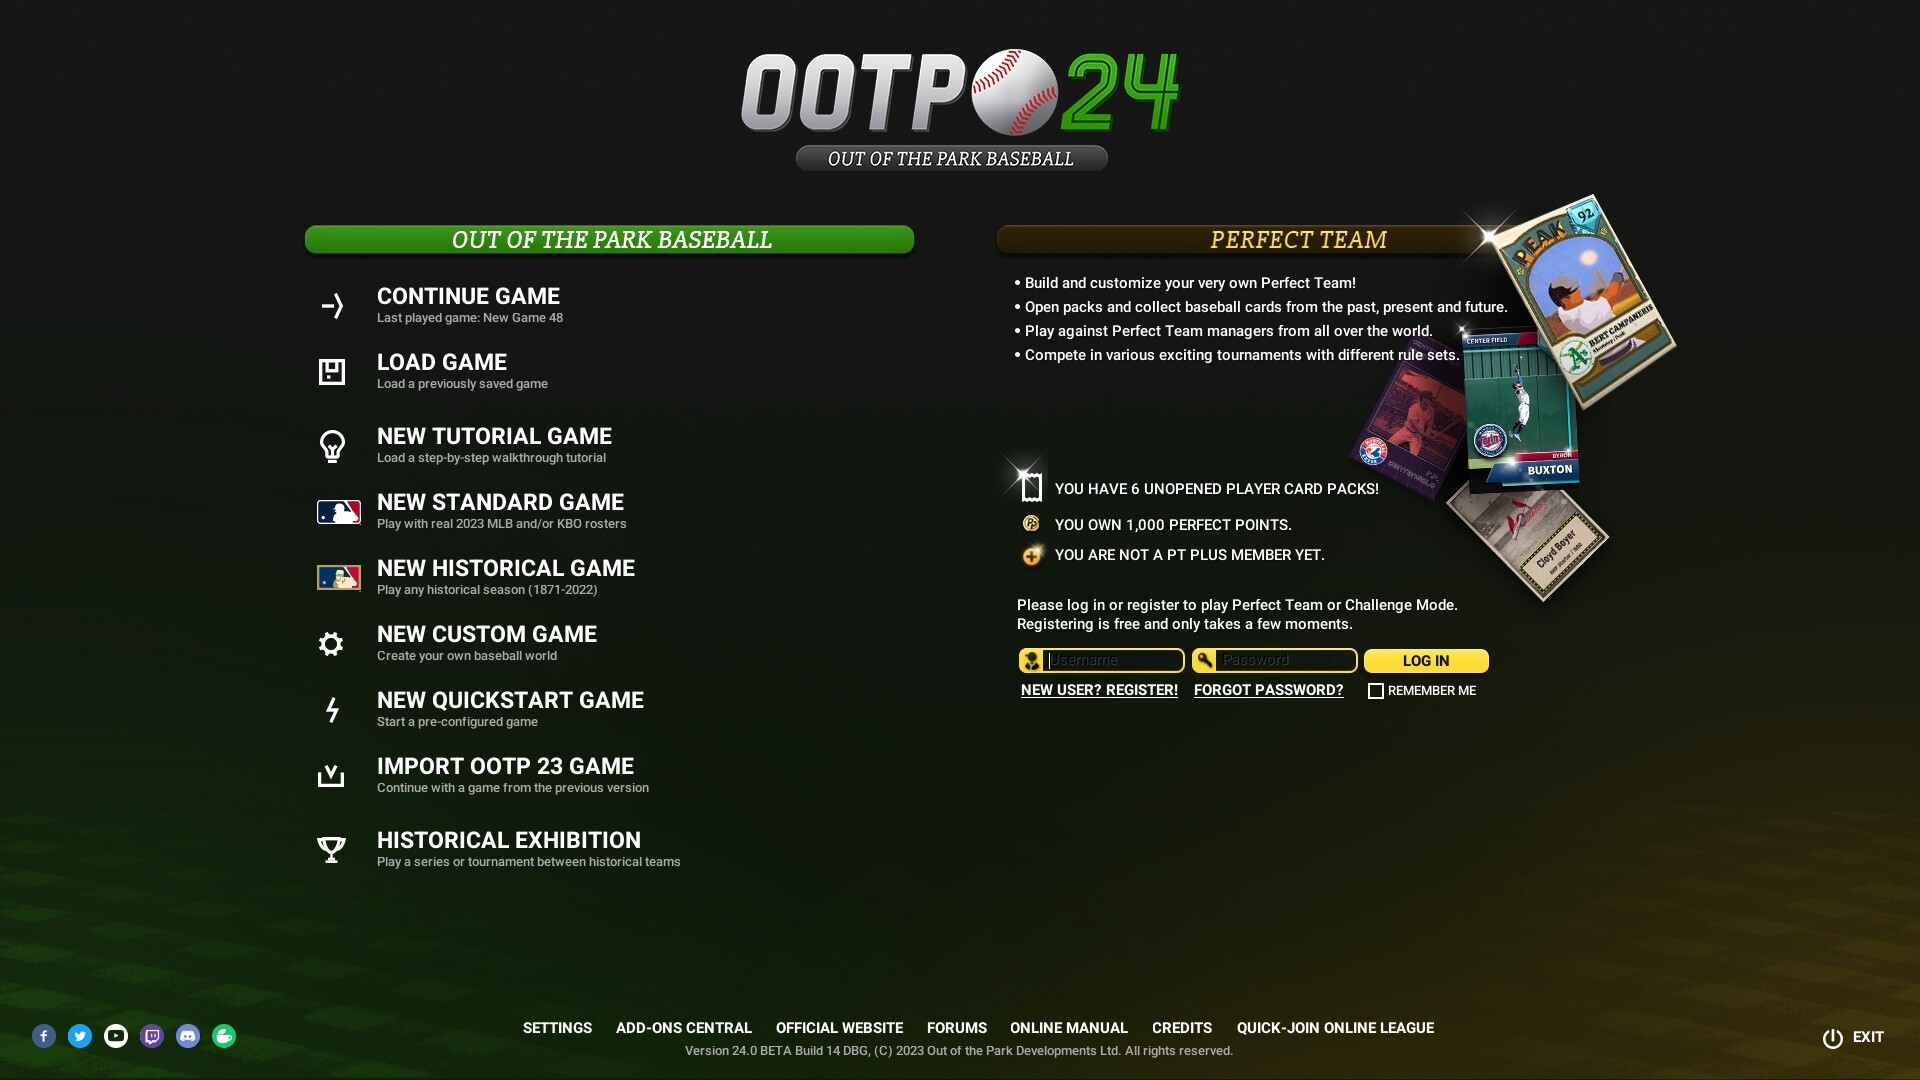 Out of the Park Baseball 24 on Steam